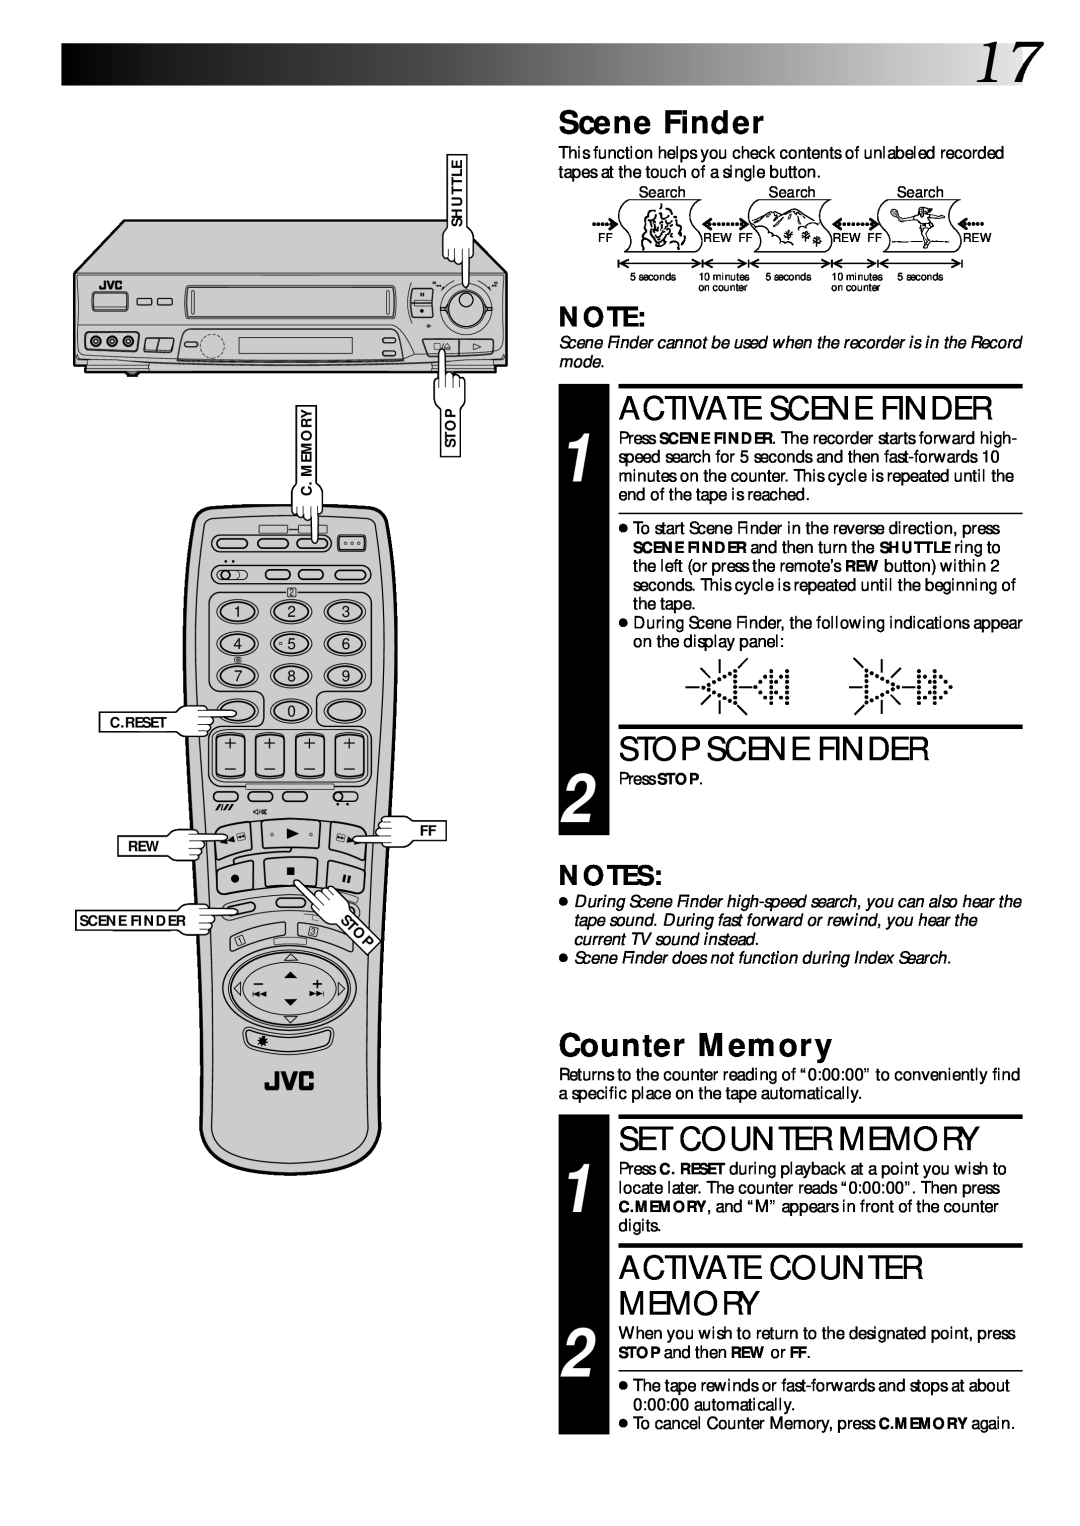 JVC PU30425 specifications Activate Scene Finder, Stop Scene Finder, Set Counter Memory, Activate Counter 